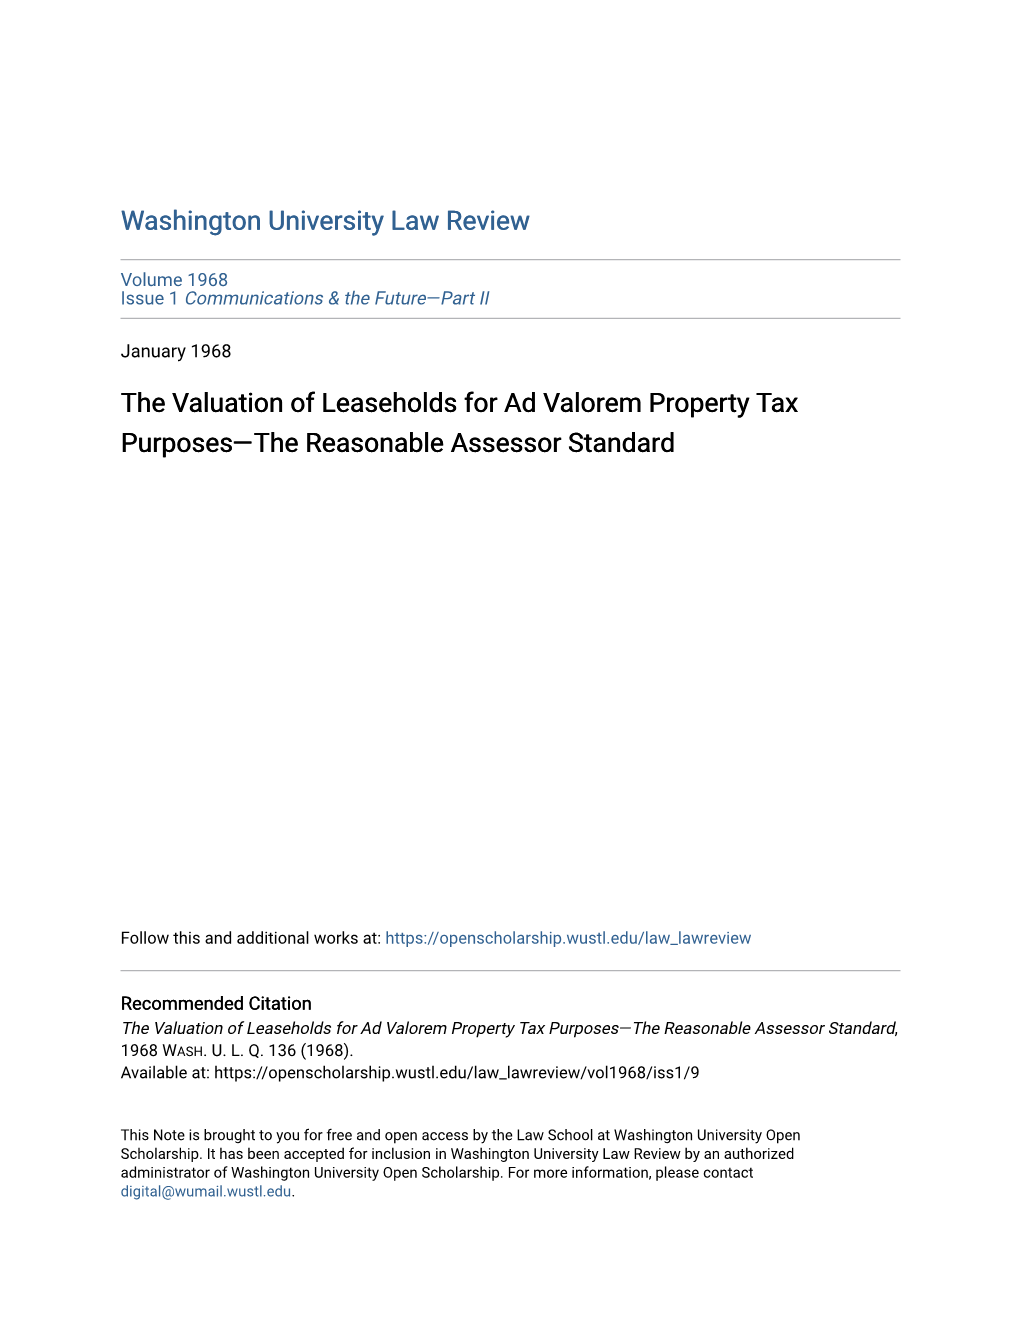 The Valuation of Leaseholds for Ad Valorem Property Tax Purposes—The Reasonable Assessor Standard